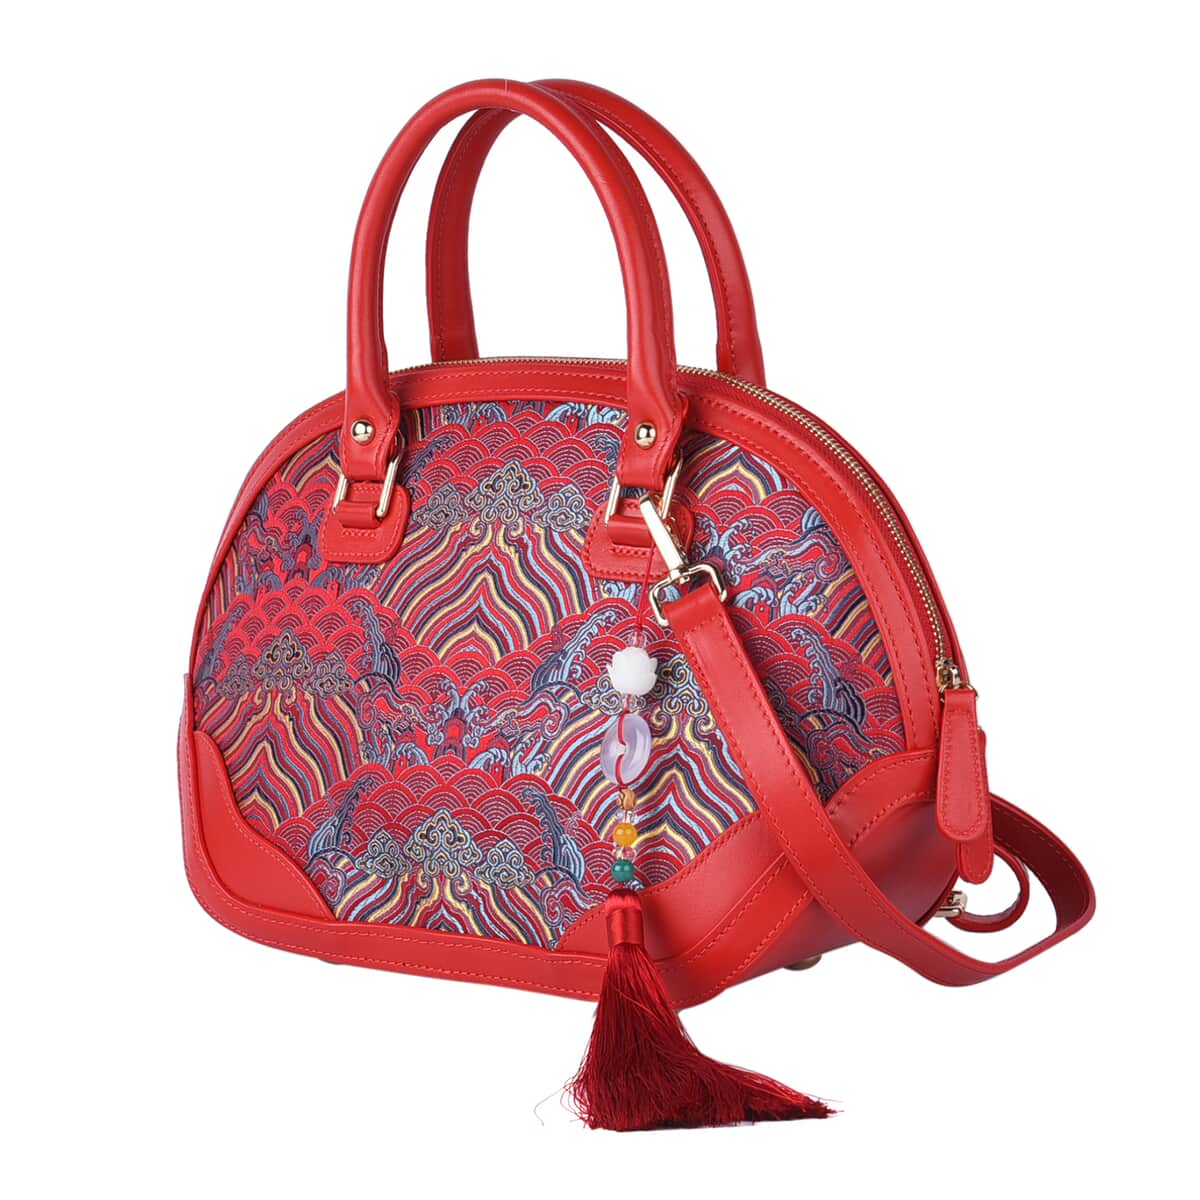 Red River Cliff Seawater Pattern Brocade Mulberry Silk with Genuine Leather Tote Bag (14"x9.06"x5.5") with Shoulder Strap image number 6